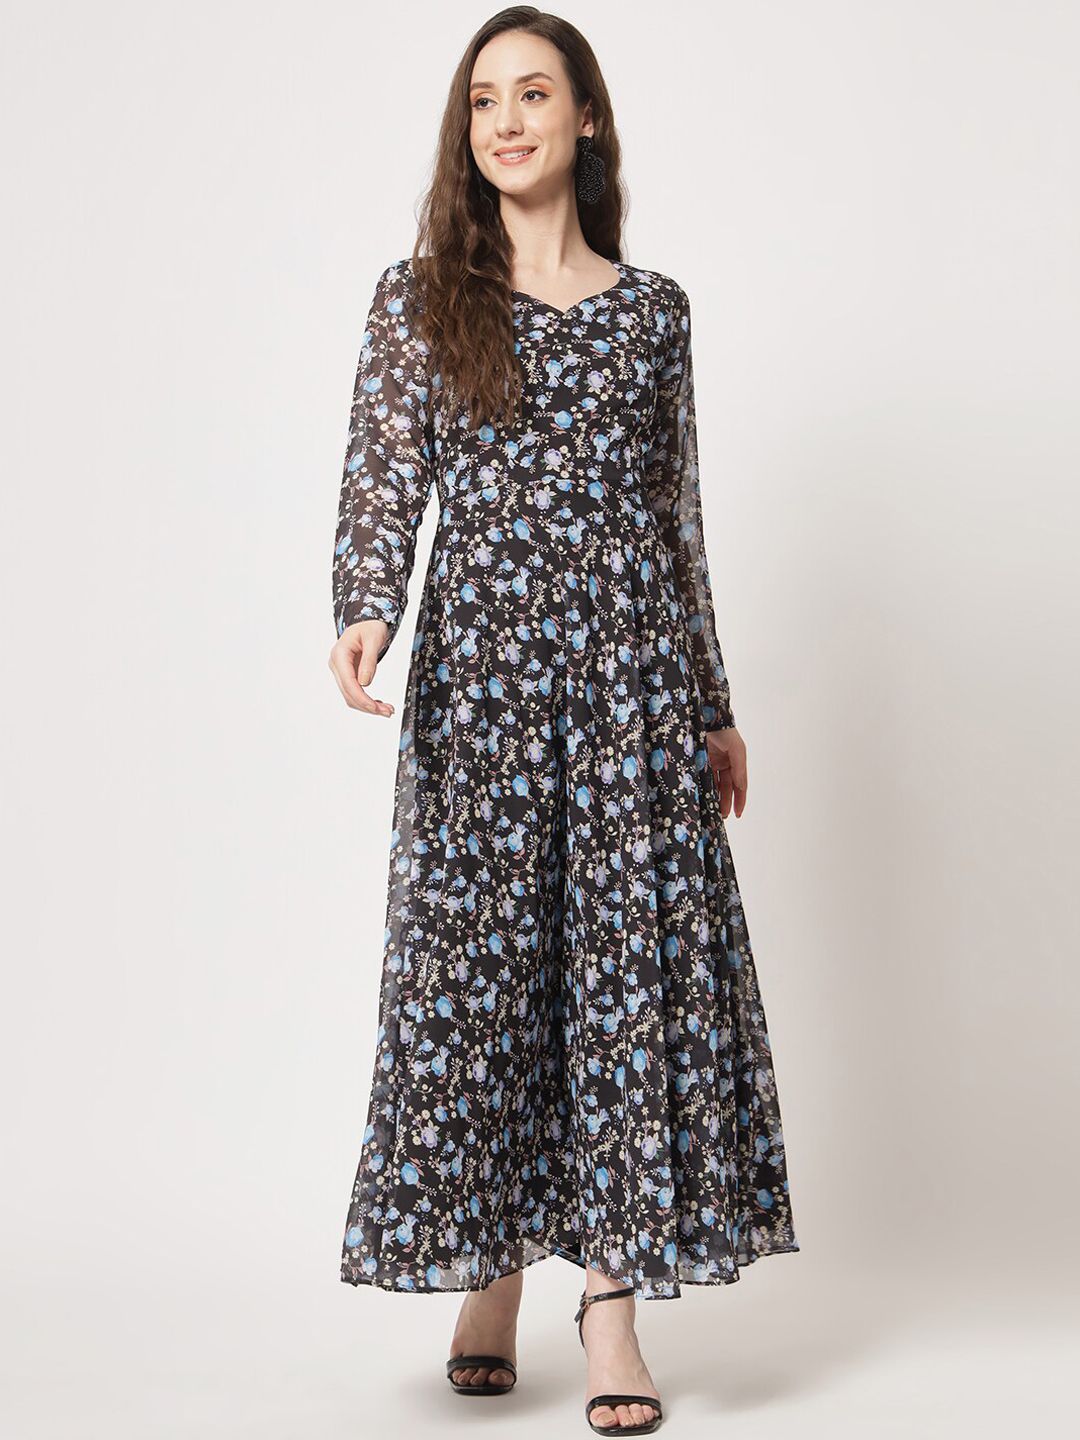 KALINI Floral Printed V-Neck A-Line Maxi Dresses Price in India